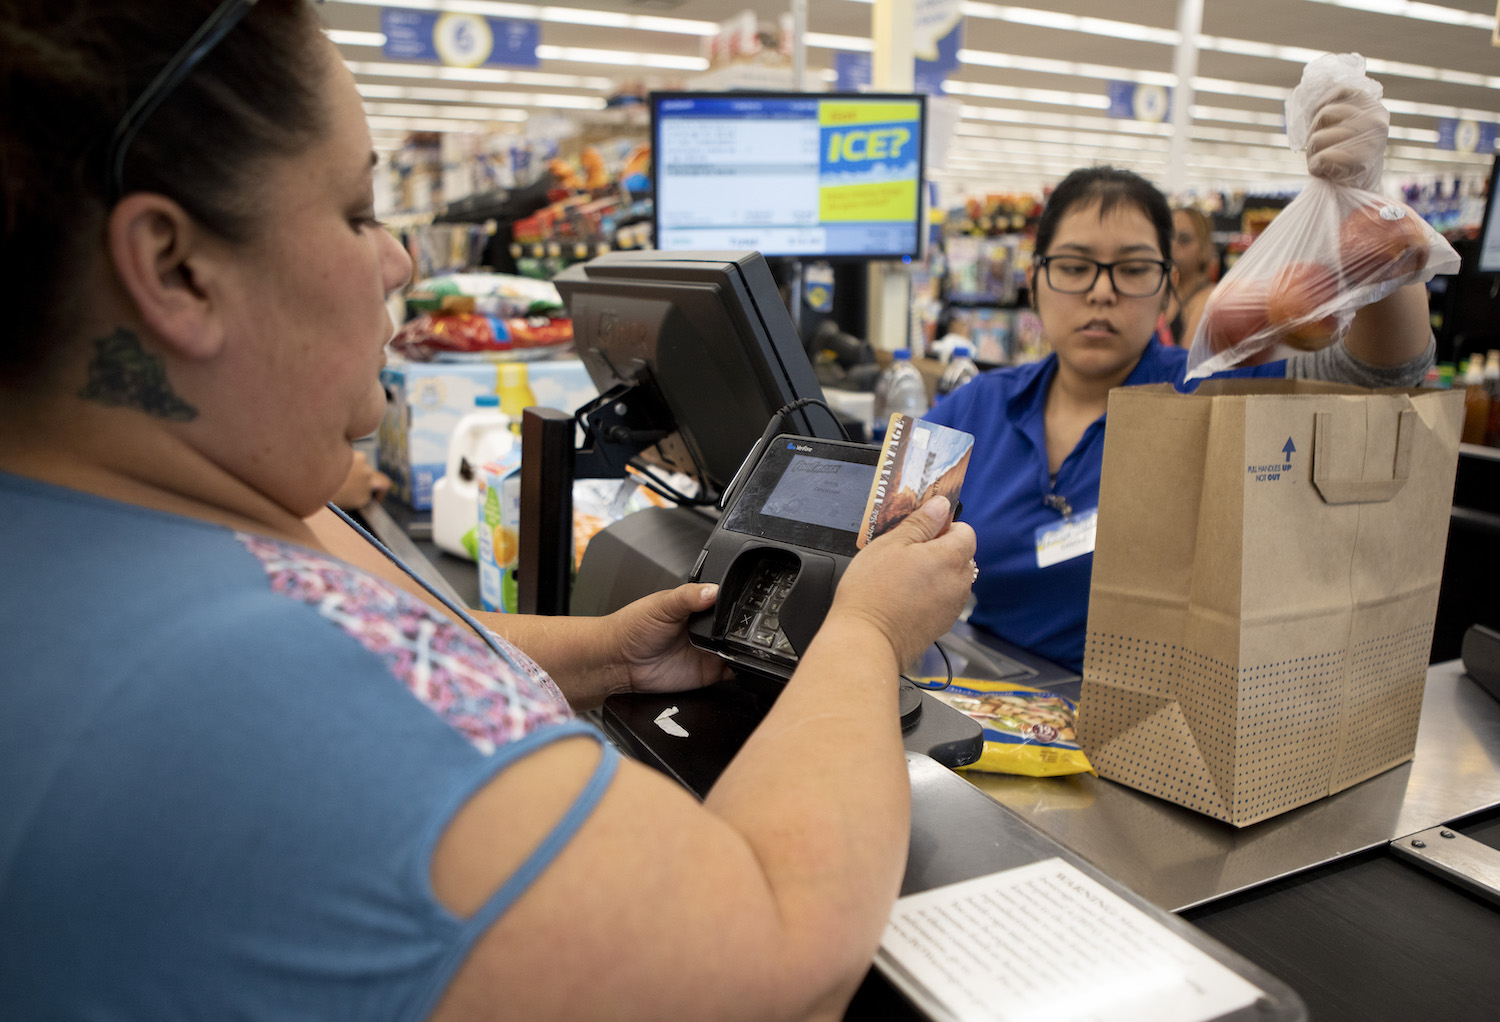 Antoinette Martinez uses CalFresh to pay for her groceries at FoodMaxx on July 26, 2019